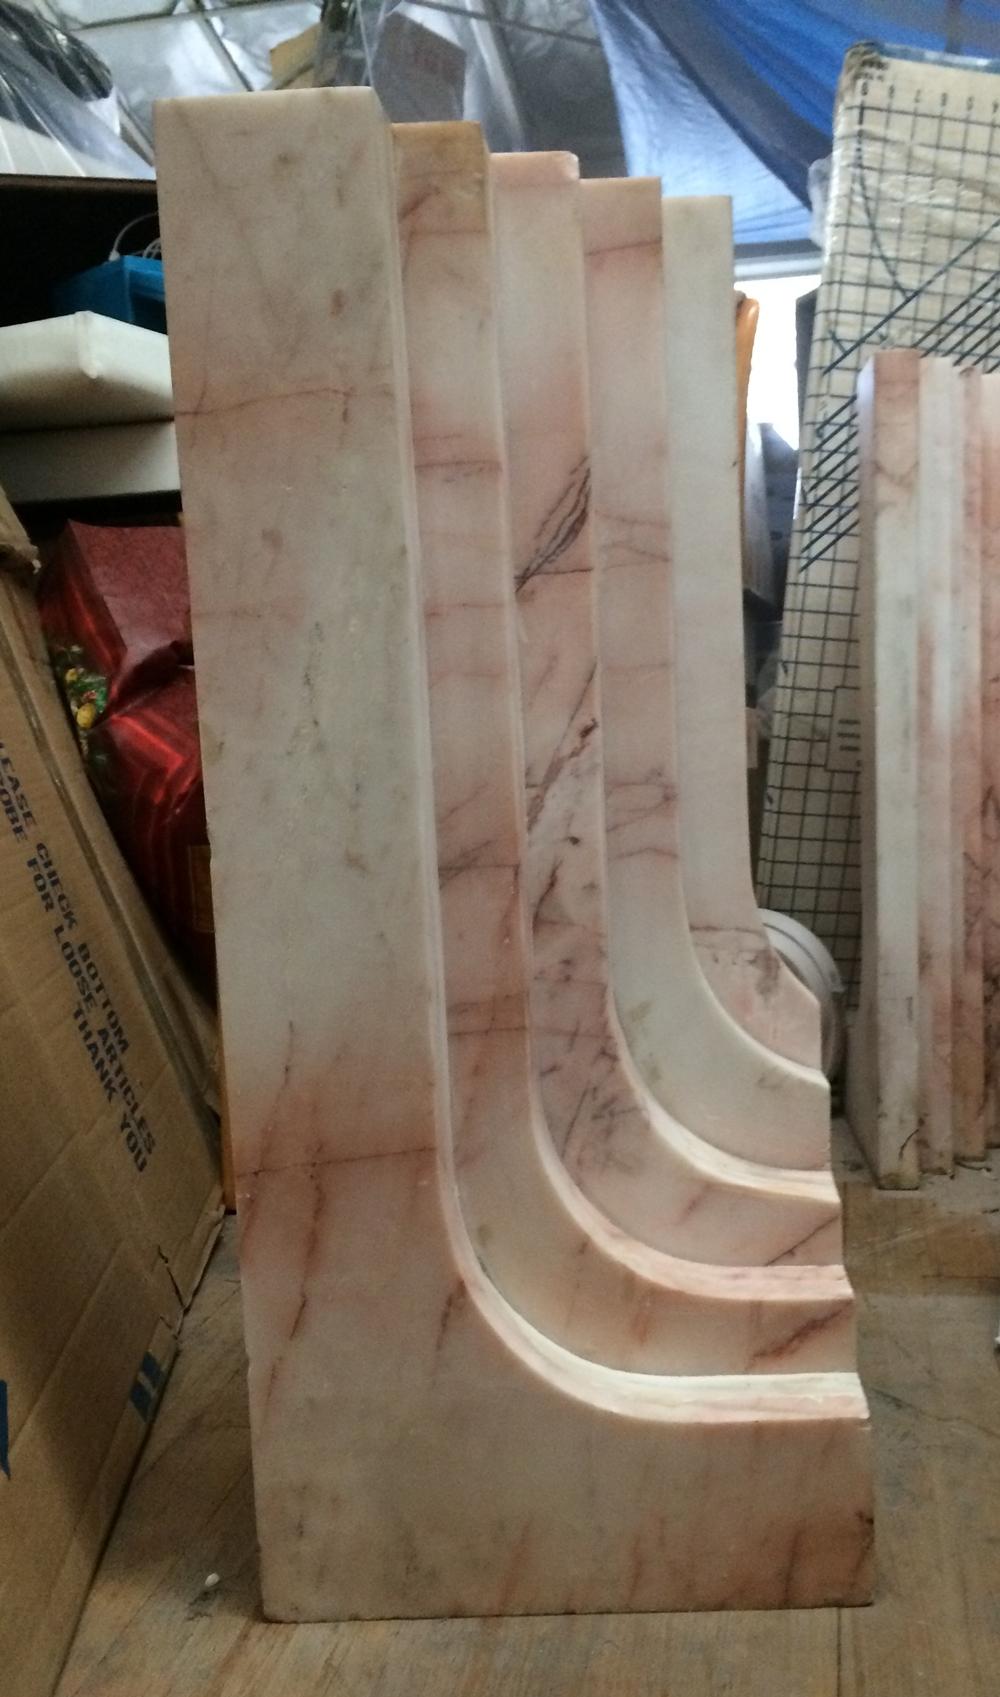 Stunning marble pedestal for a console table in pink and white marble in the style of Carlo Scarpa.

The piece is perfect t be used as a pedestal for a console table.